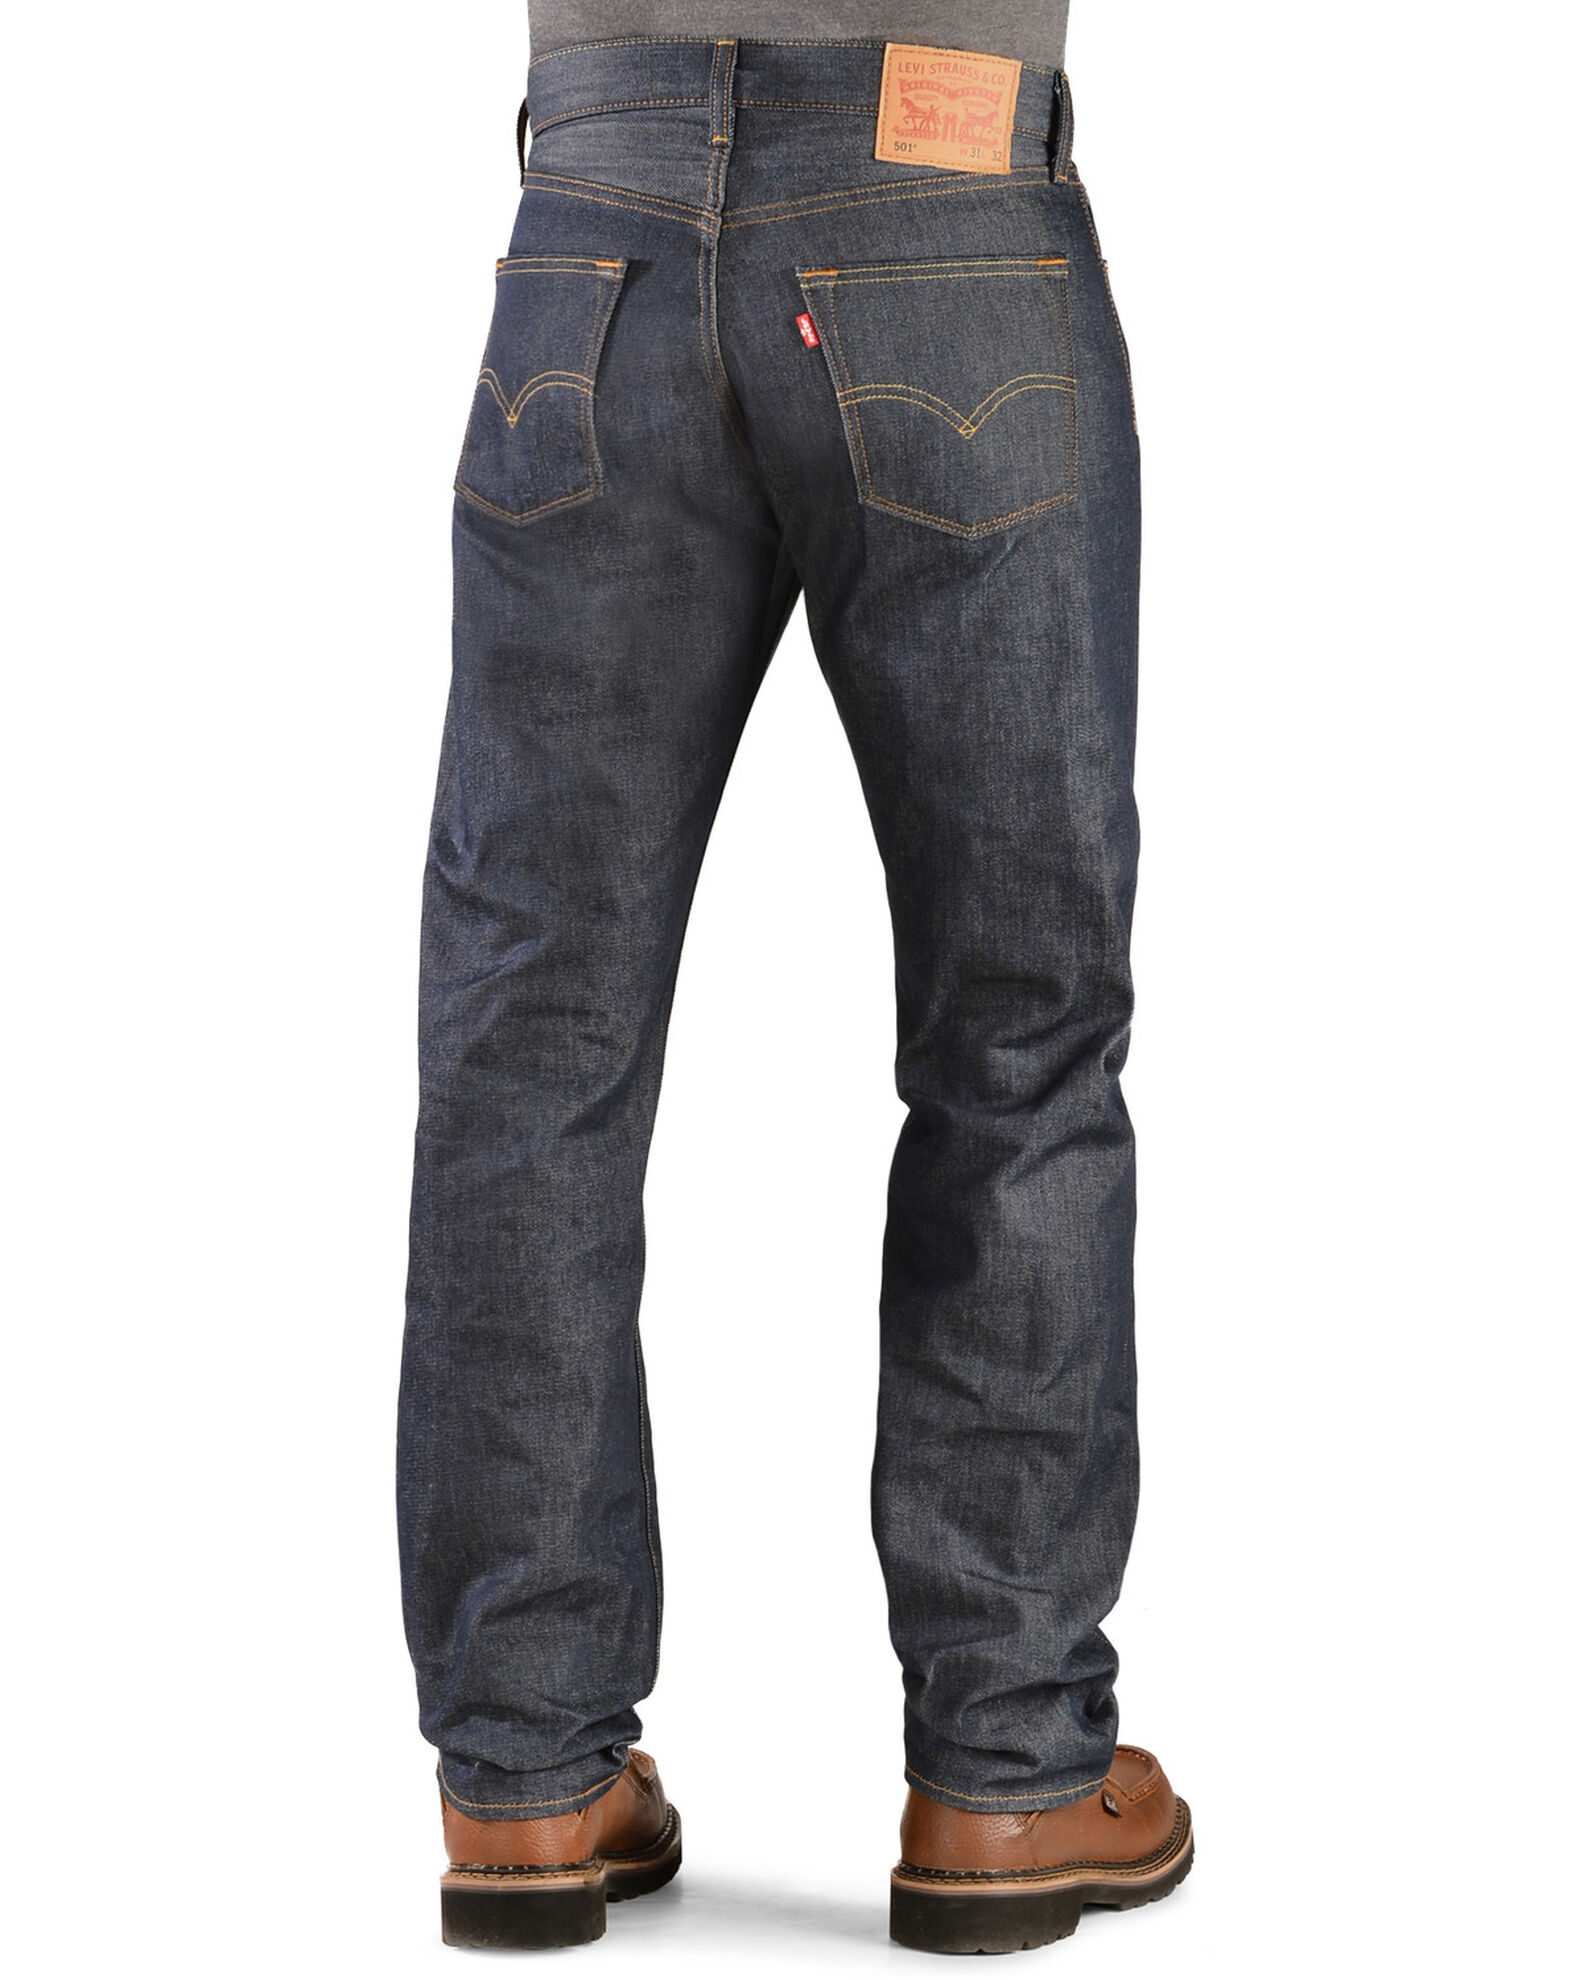 Levi's Men's Shrink-to-Fit Leg Jeans - Country Outfitter